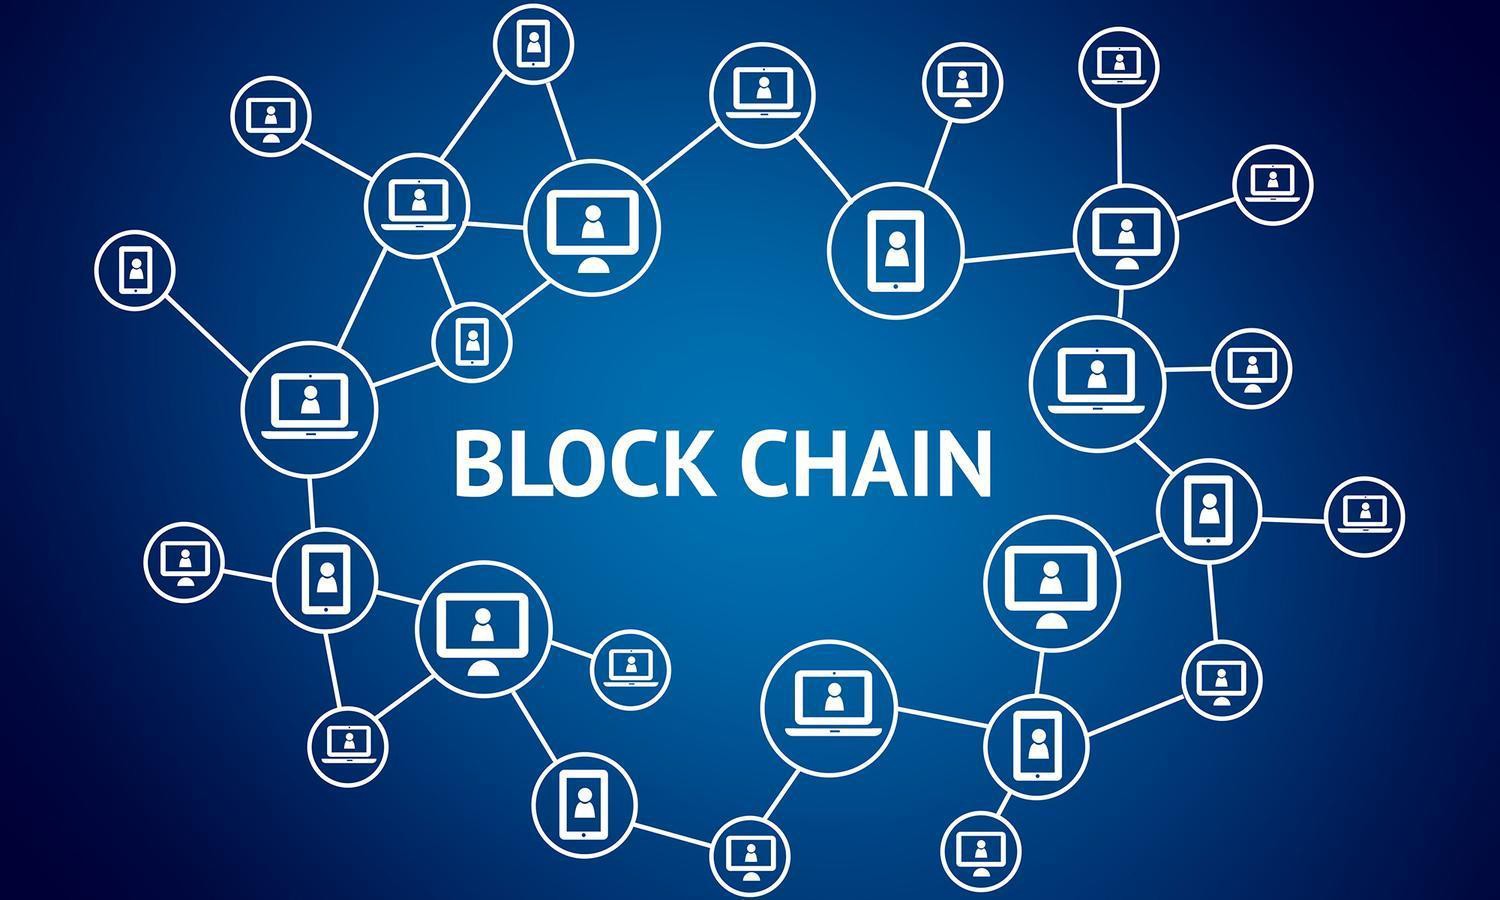 What Are The Benefits Of Blockchain?